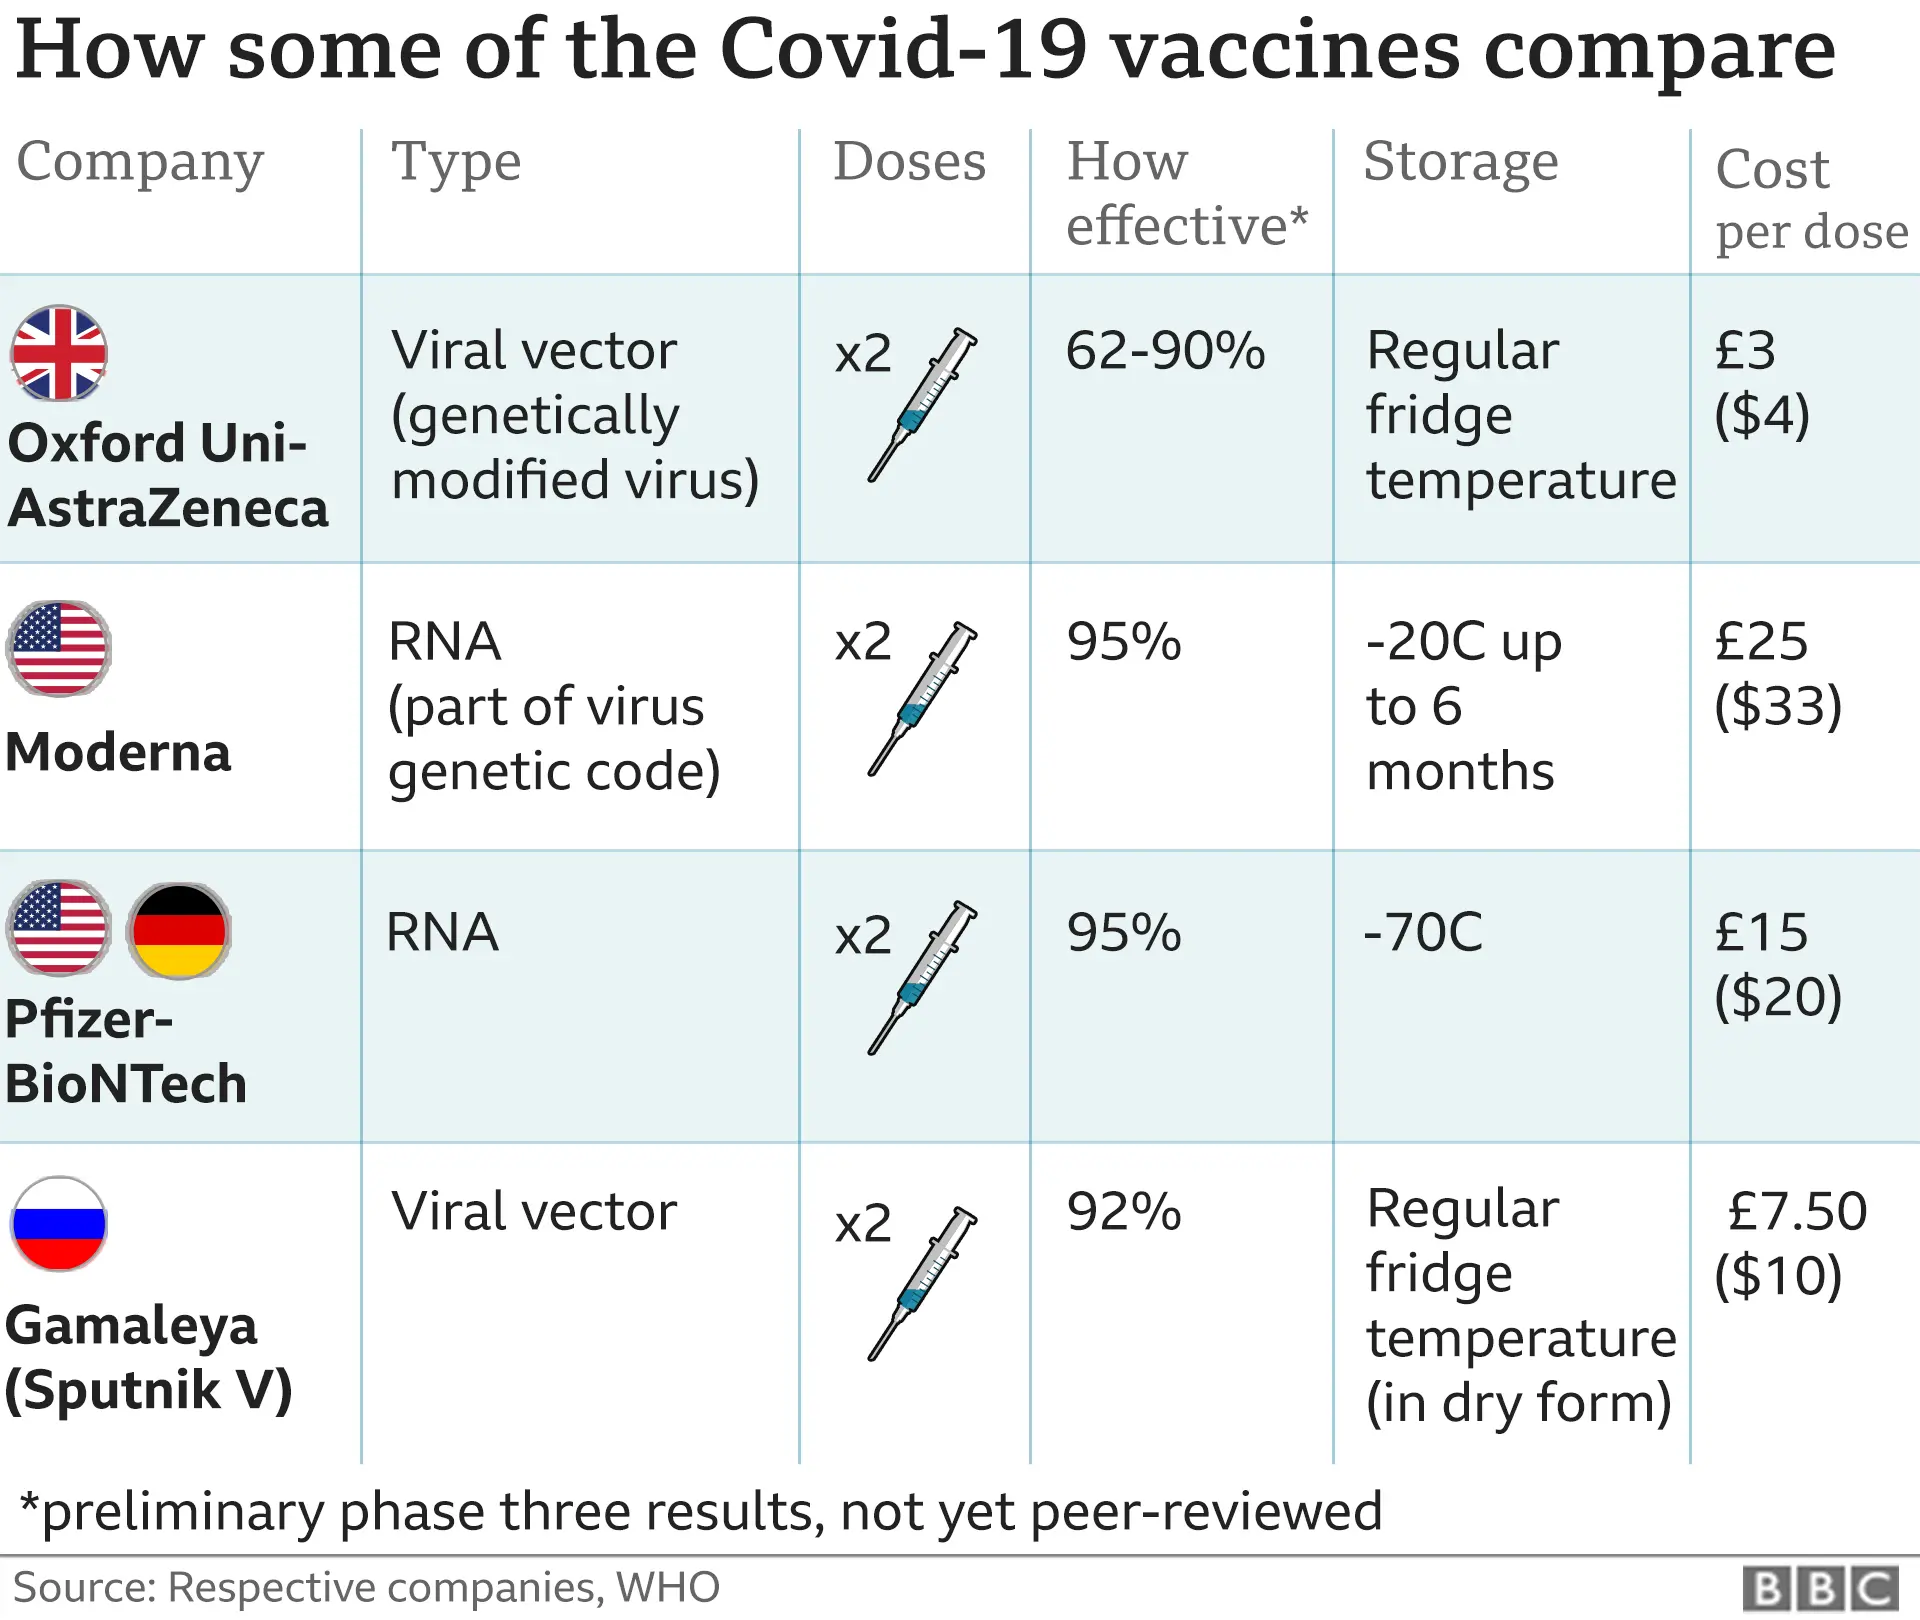 Covid-19: Pfizer/BioNTech vaccine judged safe for use in UK